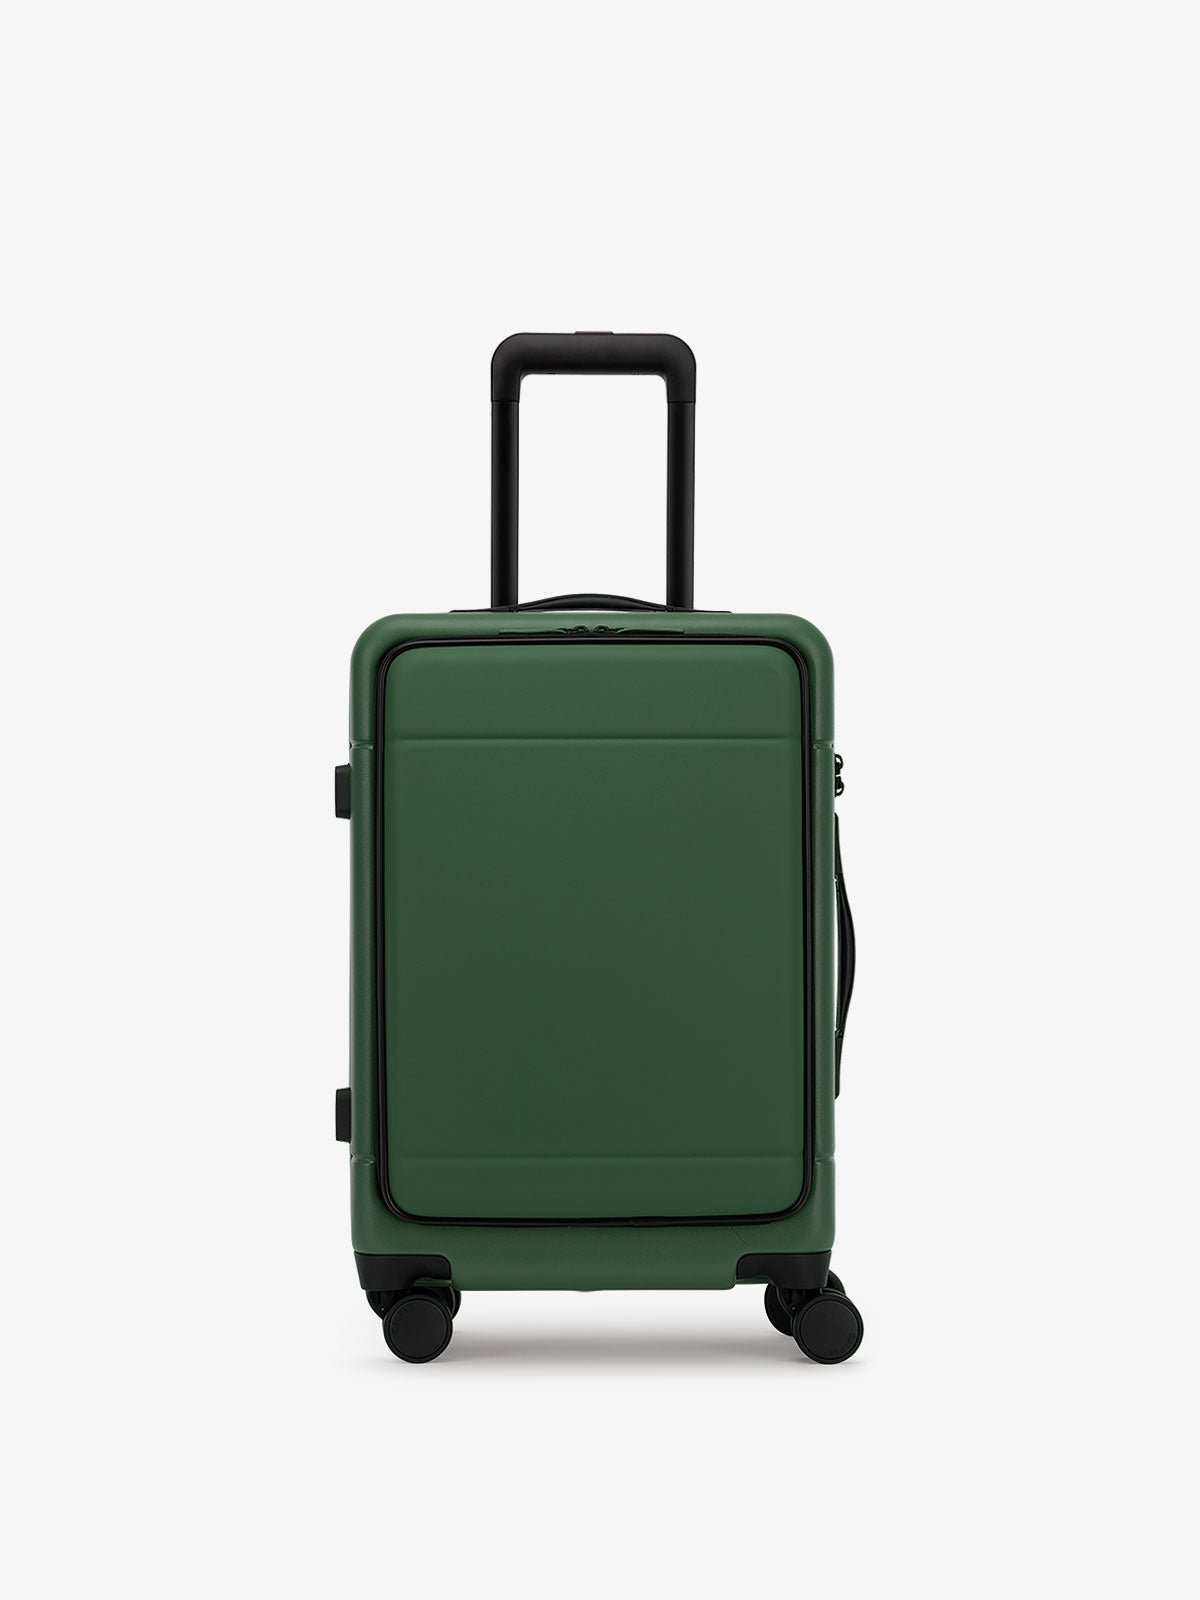 Green CALPAK Hue Front Pocket Carry-On Luggage with telescopic handle